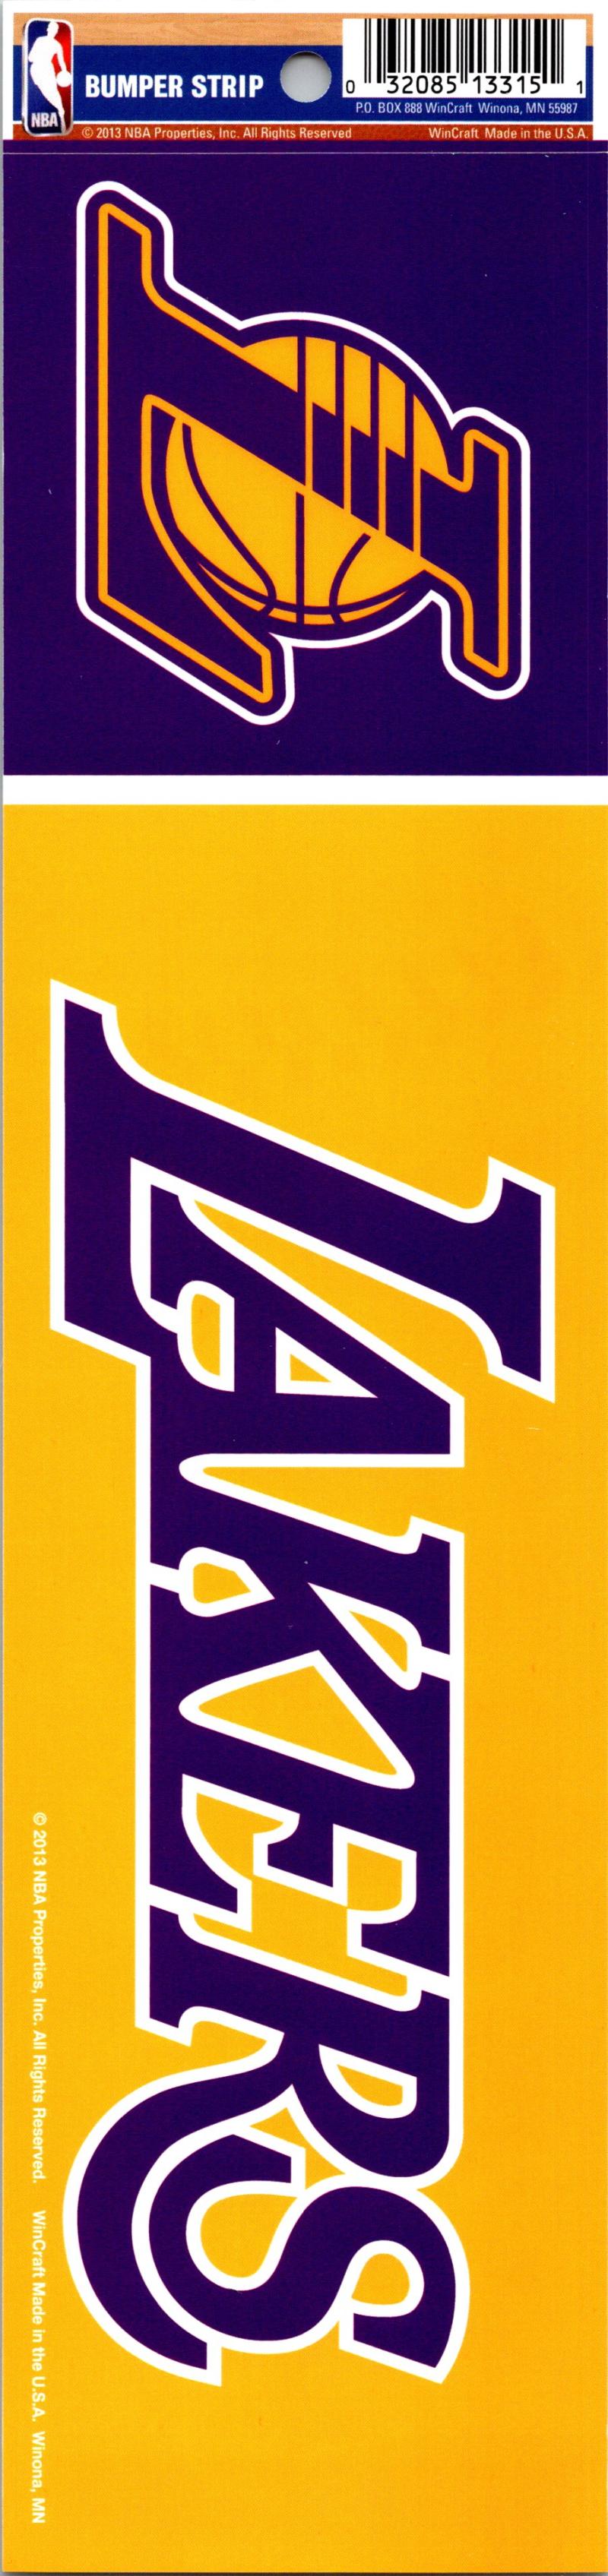 Los Angeles Lakers 3" x 12" Bumper Strip NBA Sticker Decal Image 1